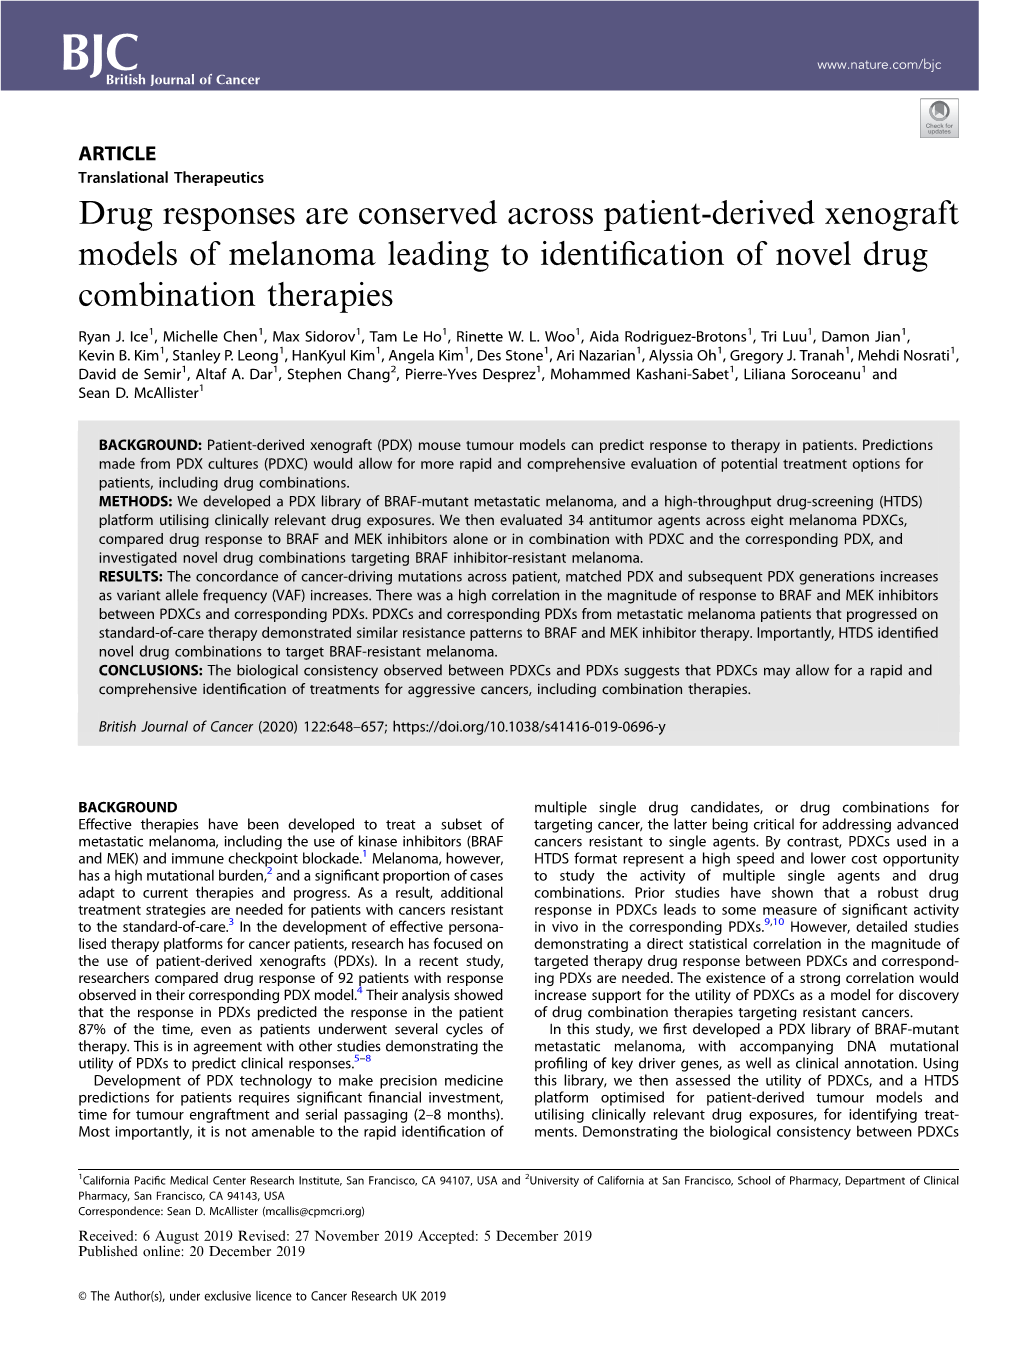 Drug Responses Are Conserved Across Patient-Derived Xenograft Models of Melanoma Leading to Identiﬁcation of Novel Drug Combination Therapies